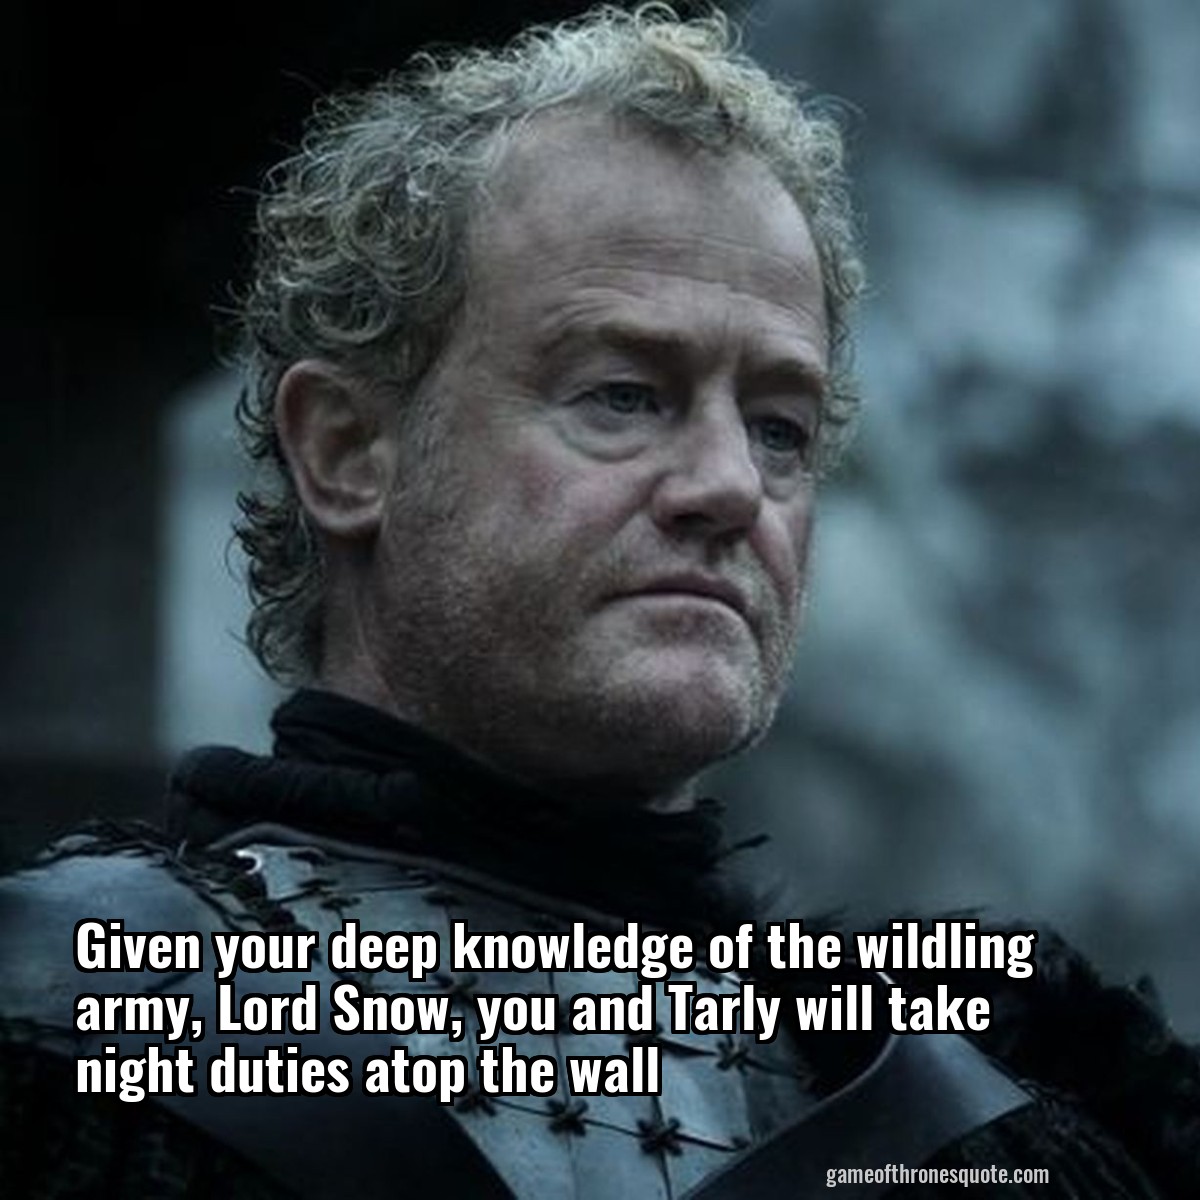 Given your deep knowledge of the wildling army, Lord Snow, you and Tarly will take night duties atop the wall